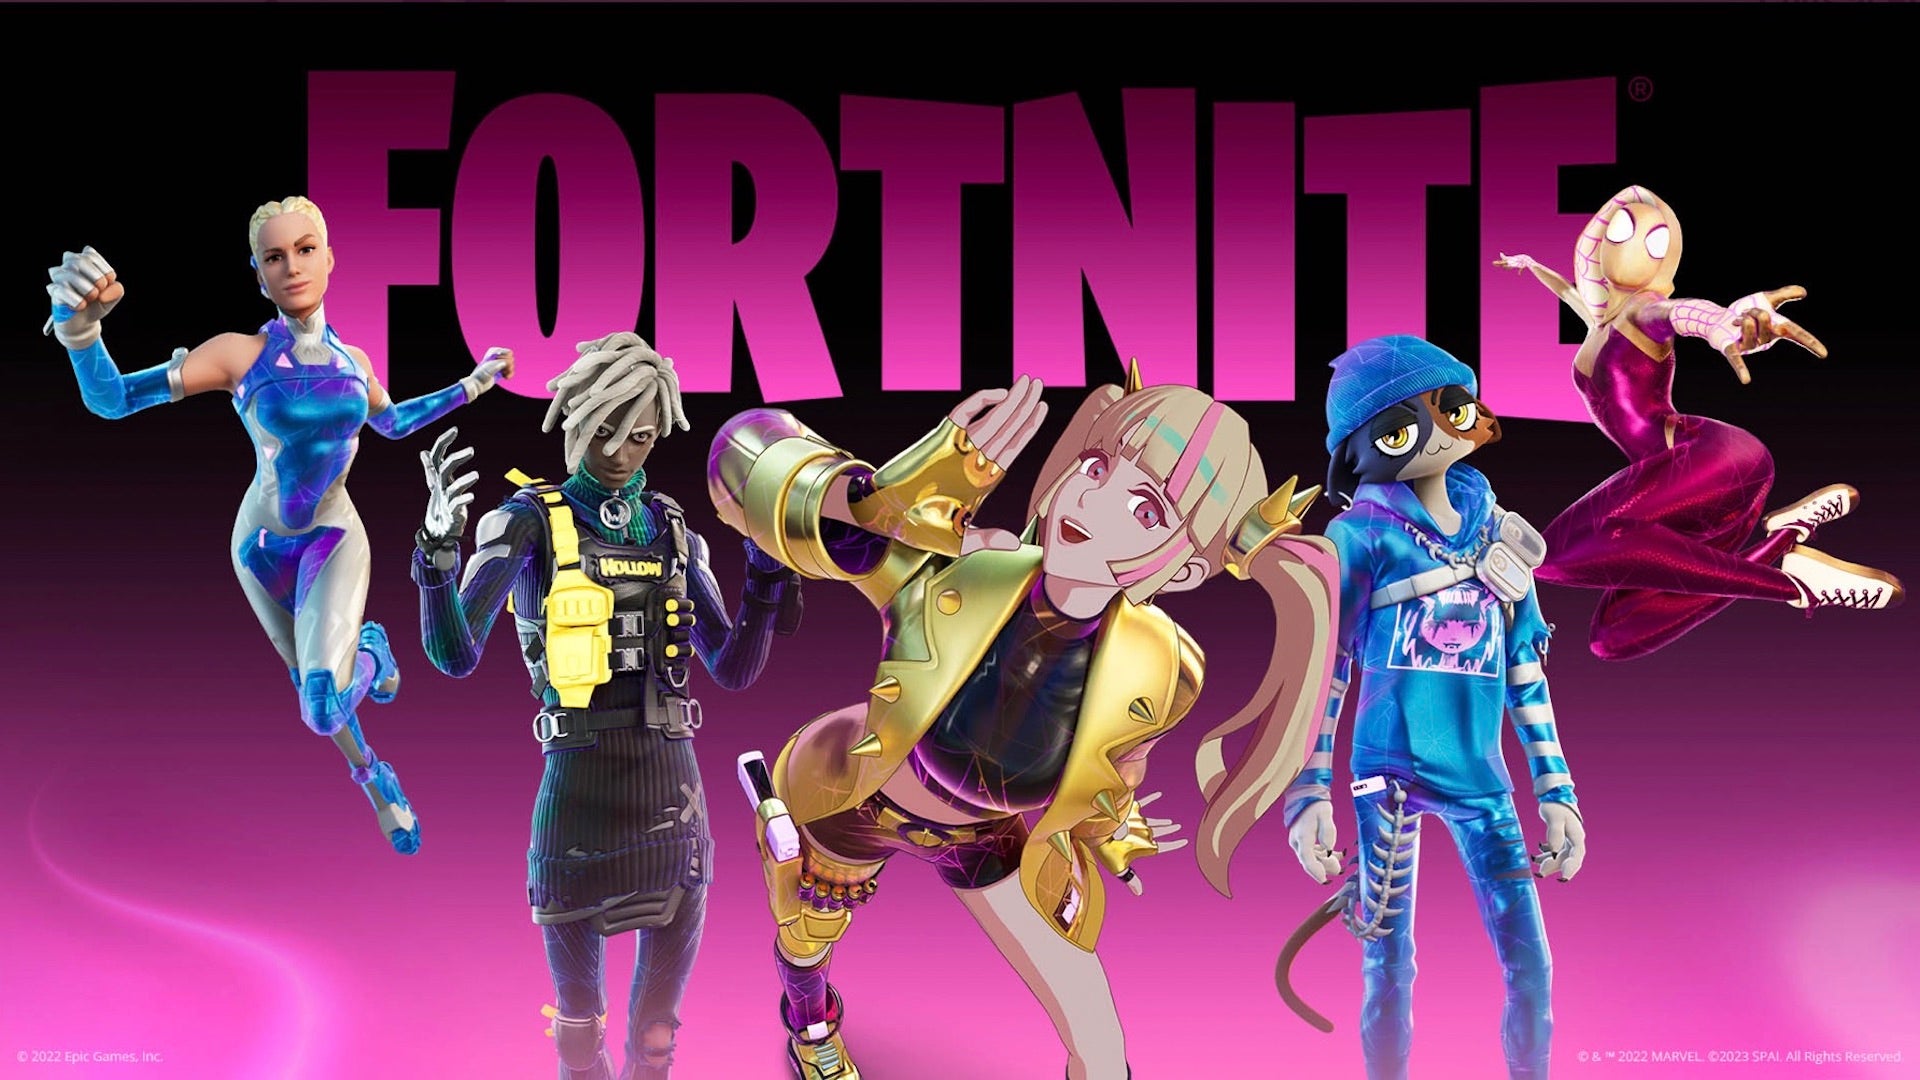 Image for Fortnite Chapter 3 Season 4 Battle Pass skins, including Spider-Gwen, Paradigm, and Twyn